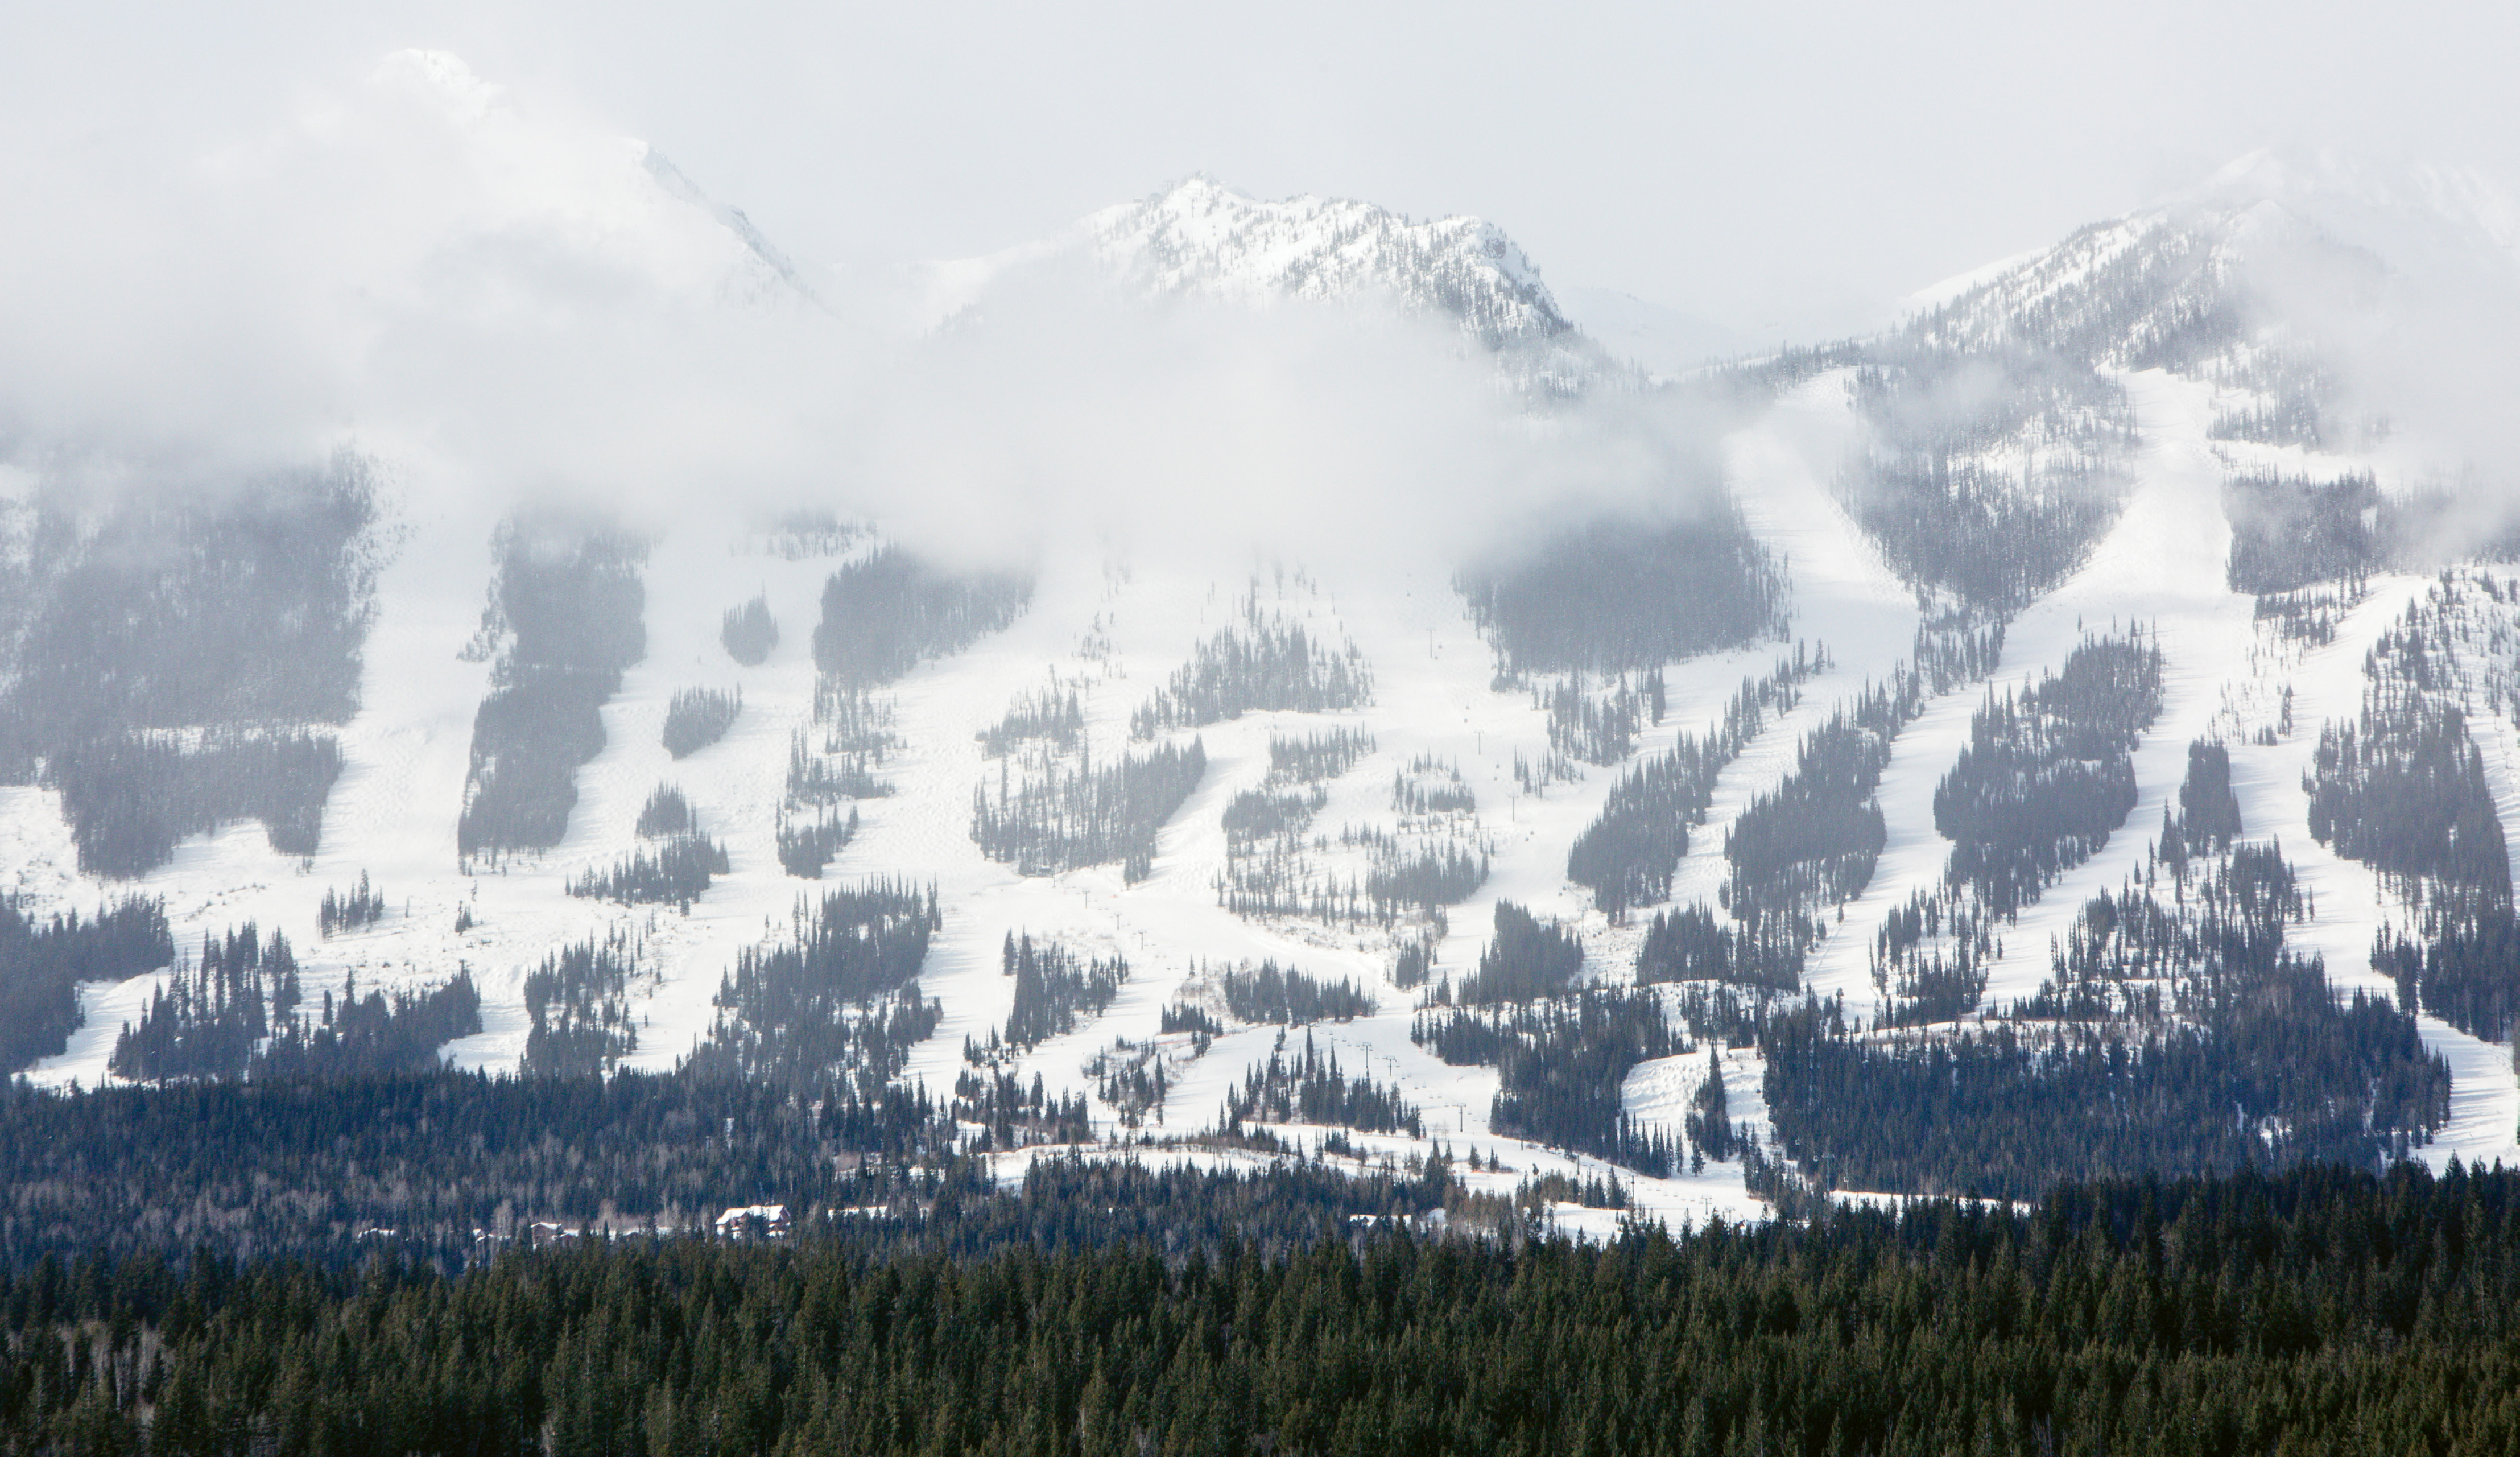 High &amp; Mighty: Kicking Horse has a few green runs, but its the gondola-accessible high Alpine terrain that make this mountain a hard-to-reach but worthy destination in central BC.